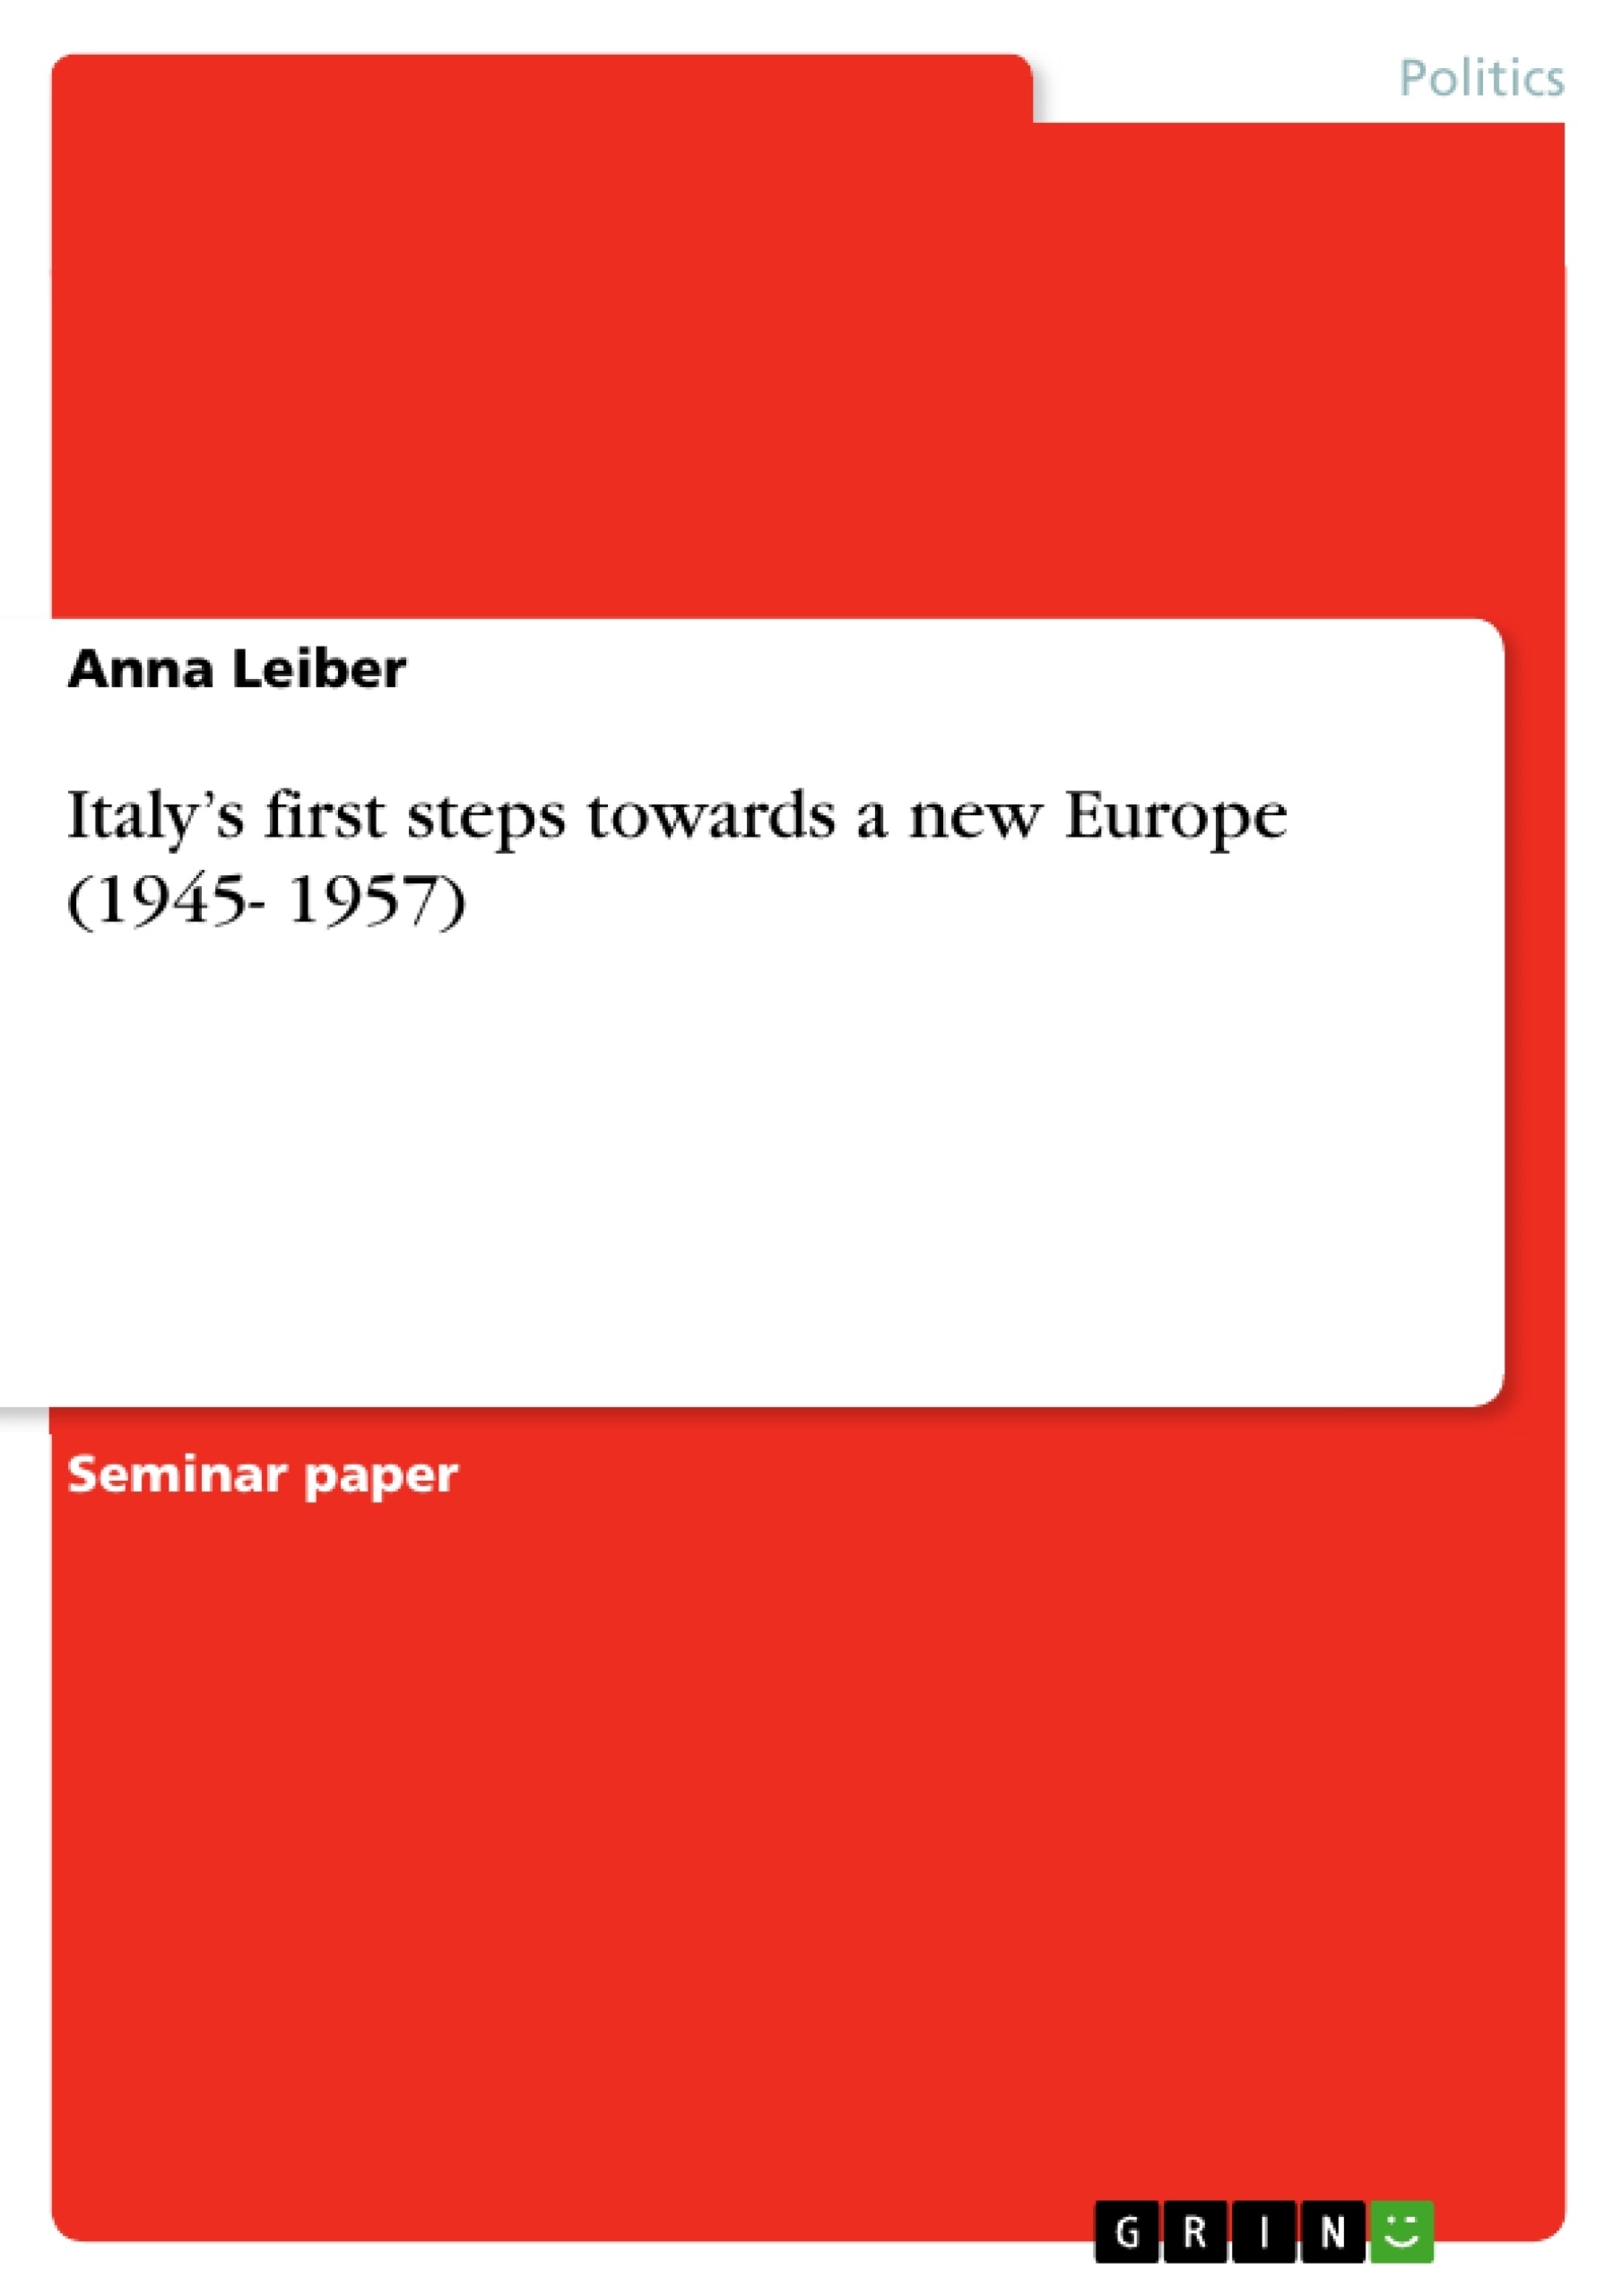 Titel: Italy’s first steps towards a new Europe (1945- 1957)